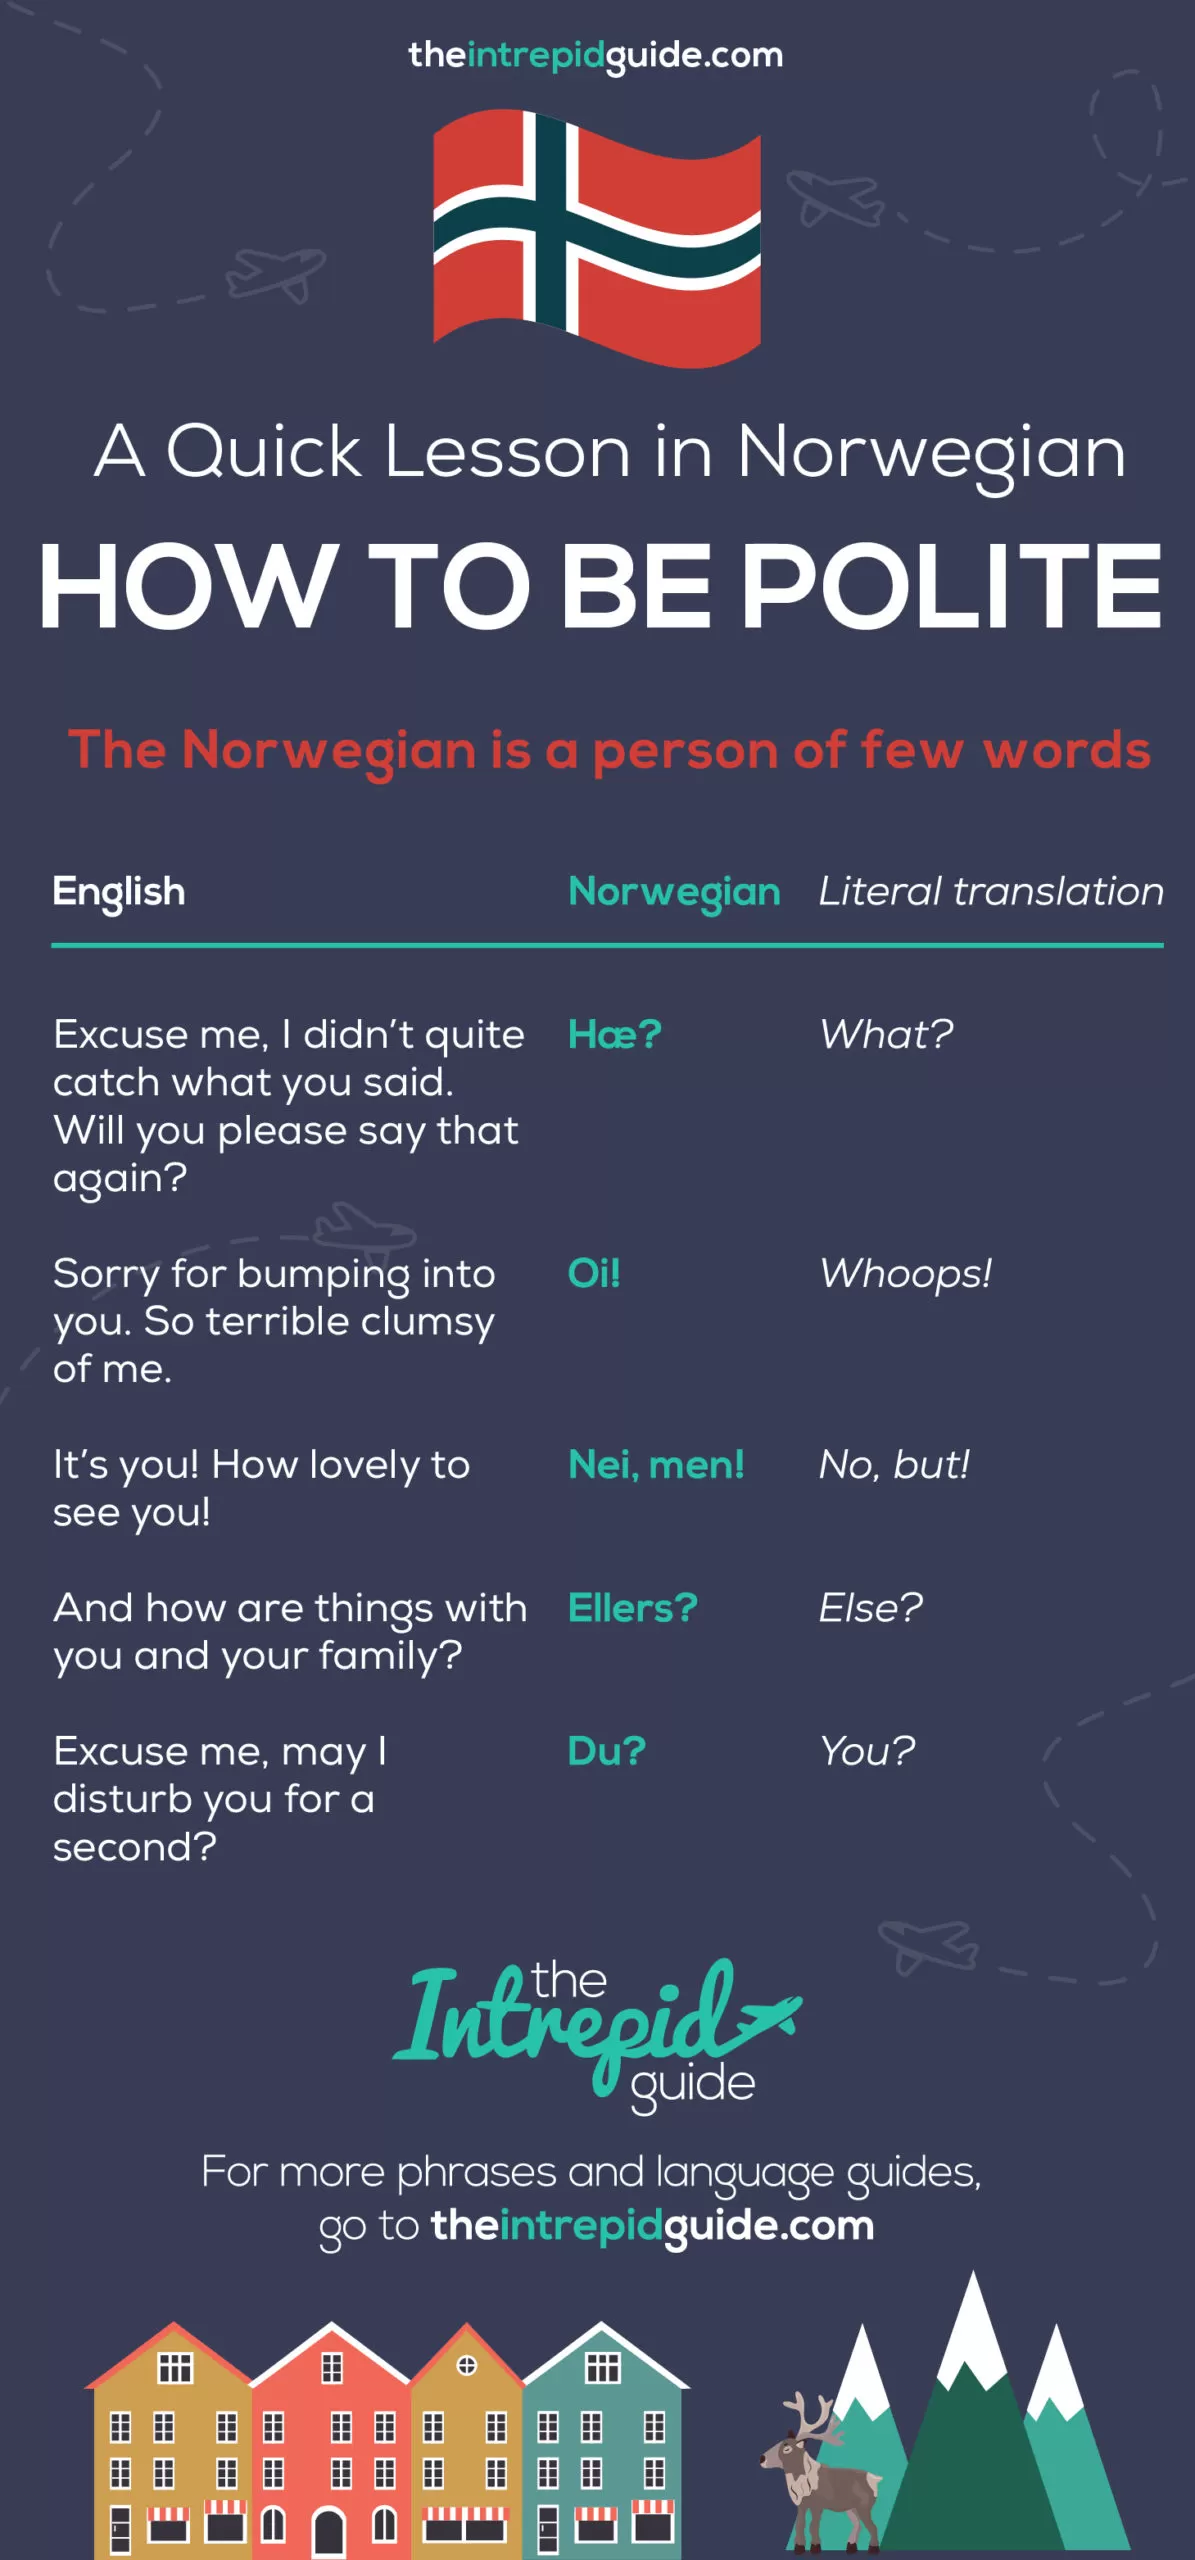 Is Norwegian Hard to Learn? - A Lesson in Norwegian - How to be polite in Norwegian